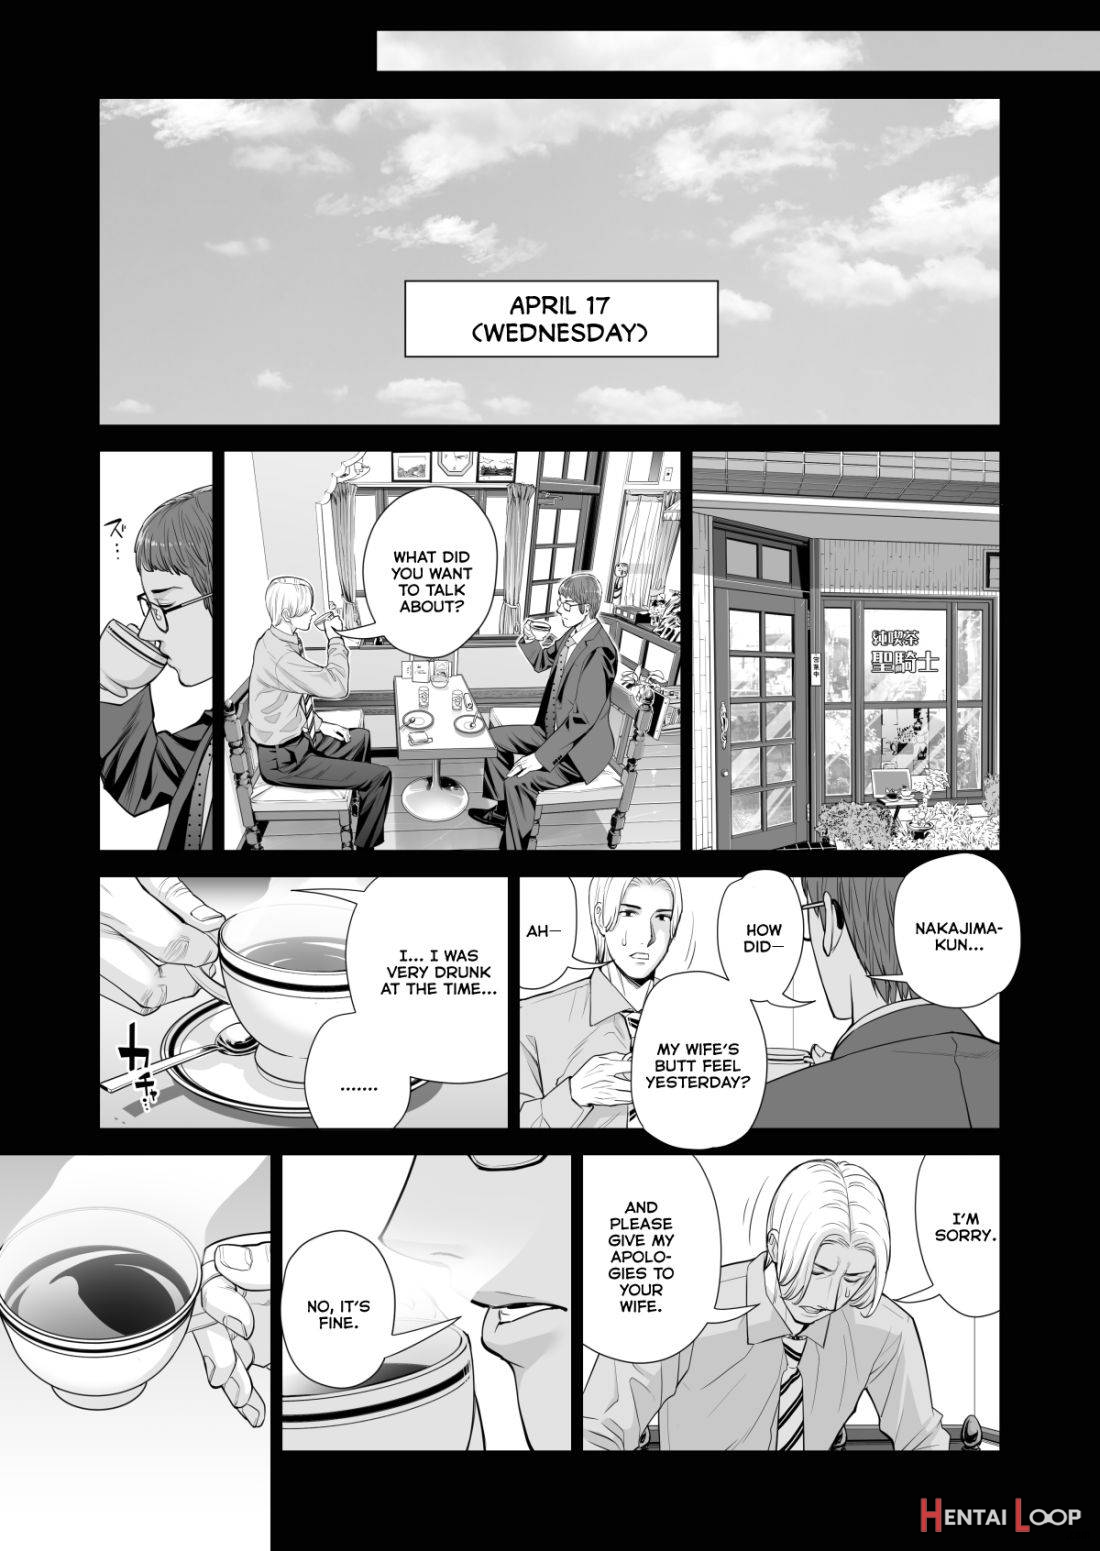 Tsukiyo no Midare Zake (Kouhen) Moonlit Intoxication ~ A Housewife Stolen by a Coworker Besides her Blackout Drunk Husband ~ Chapter 2 page 44